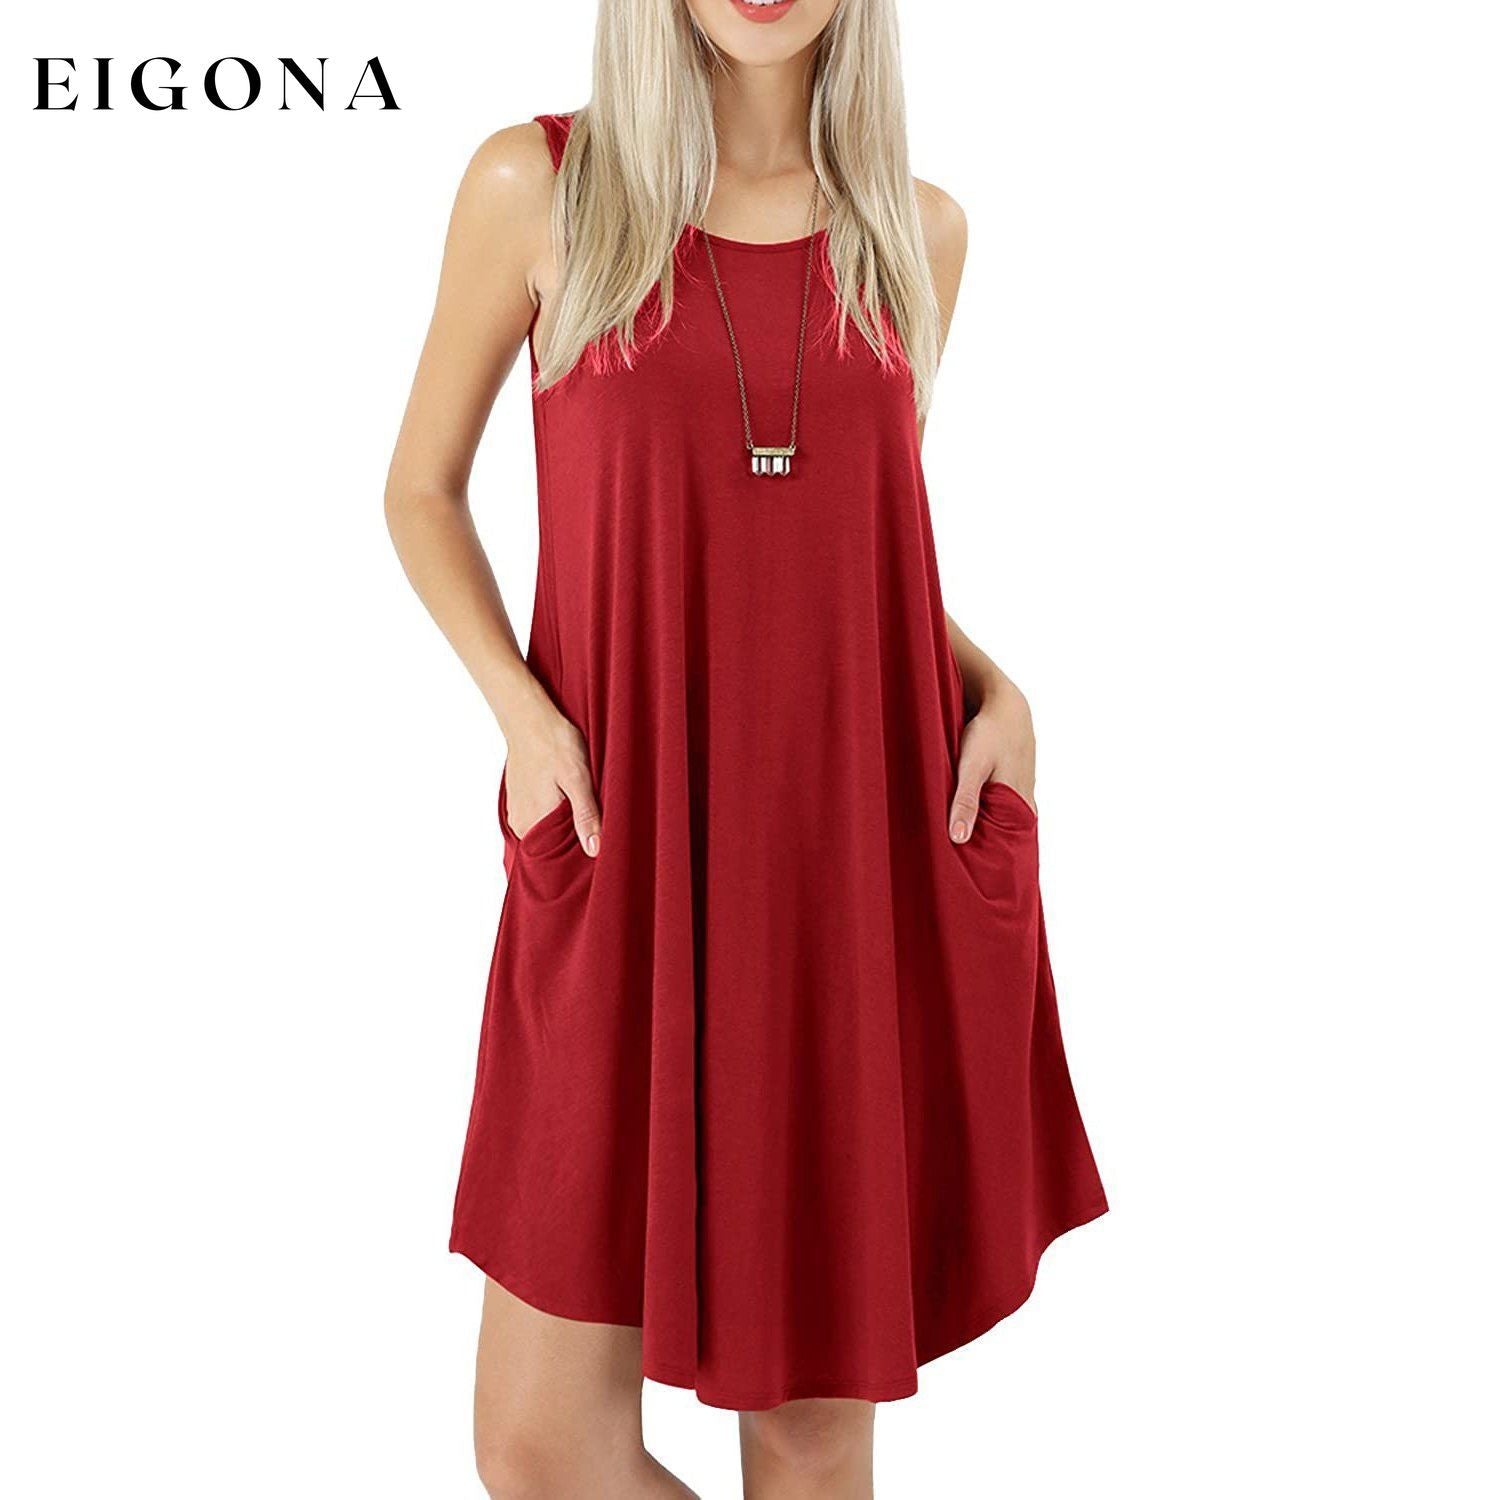 Women's Sleeveless Pockets Casual Swing T-Shirt Short Dresses Wine __stock:200 casual dresses clothes dresses refund_fee:800